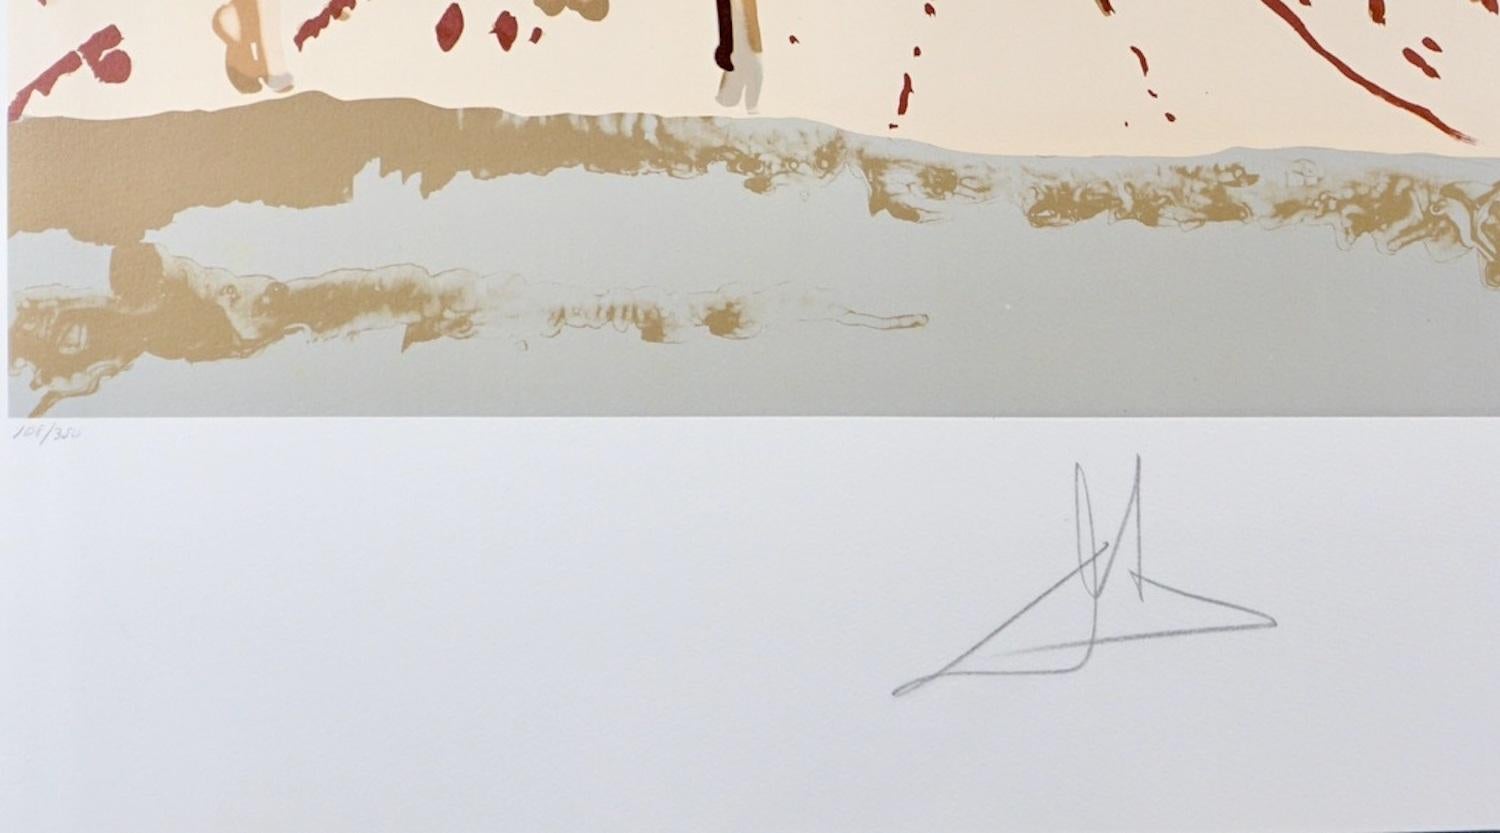 This suite contains 2 lithographs, The Harbinger and The Messiah.  Both lithographs are hand signed by Salvador Dali and matched numbered 108/350.  Reference: The Official Catalog of The Graphic Works of Salvador DALI by Albert Field page 185 #80-1.